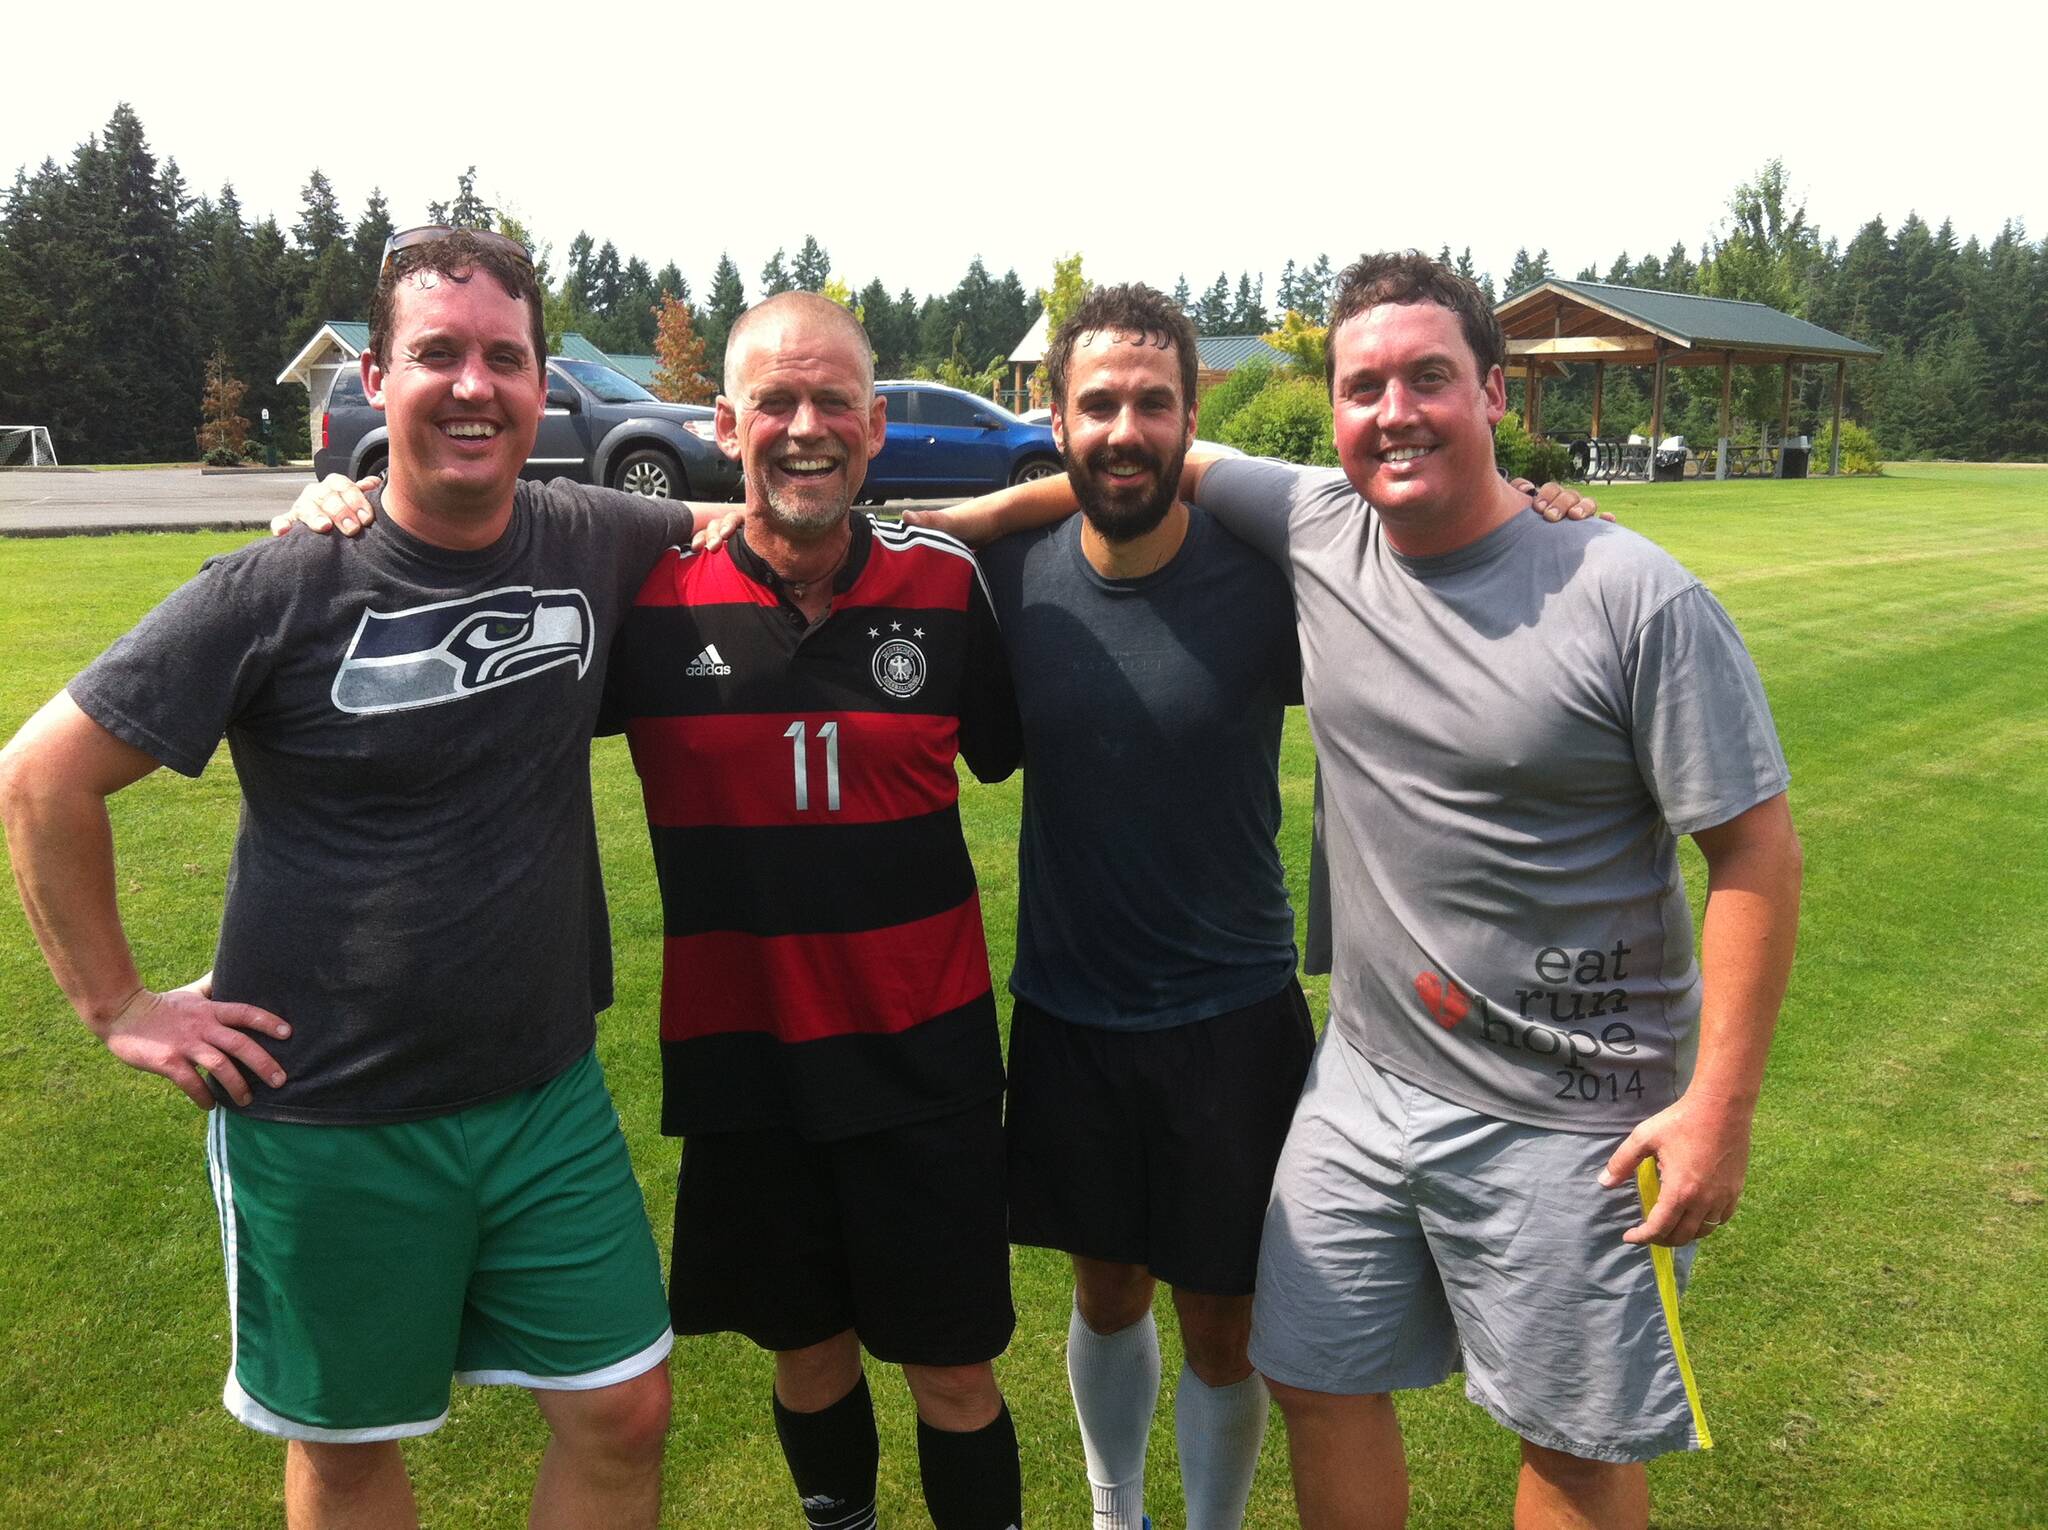 Photo provided
From left, James Traynor, Mark Helpenstell, Chris Layman and Joe Traynor play at the weekly pickup soccer game Helpenstell helped start in Langley.